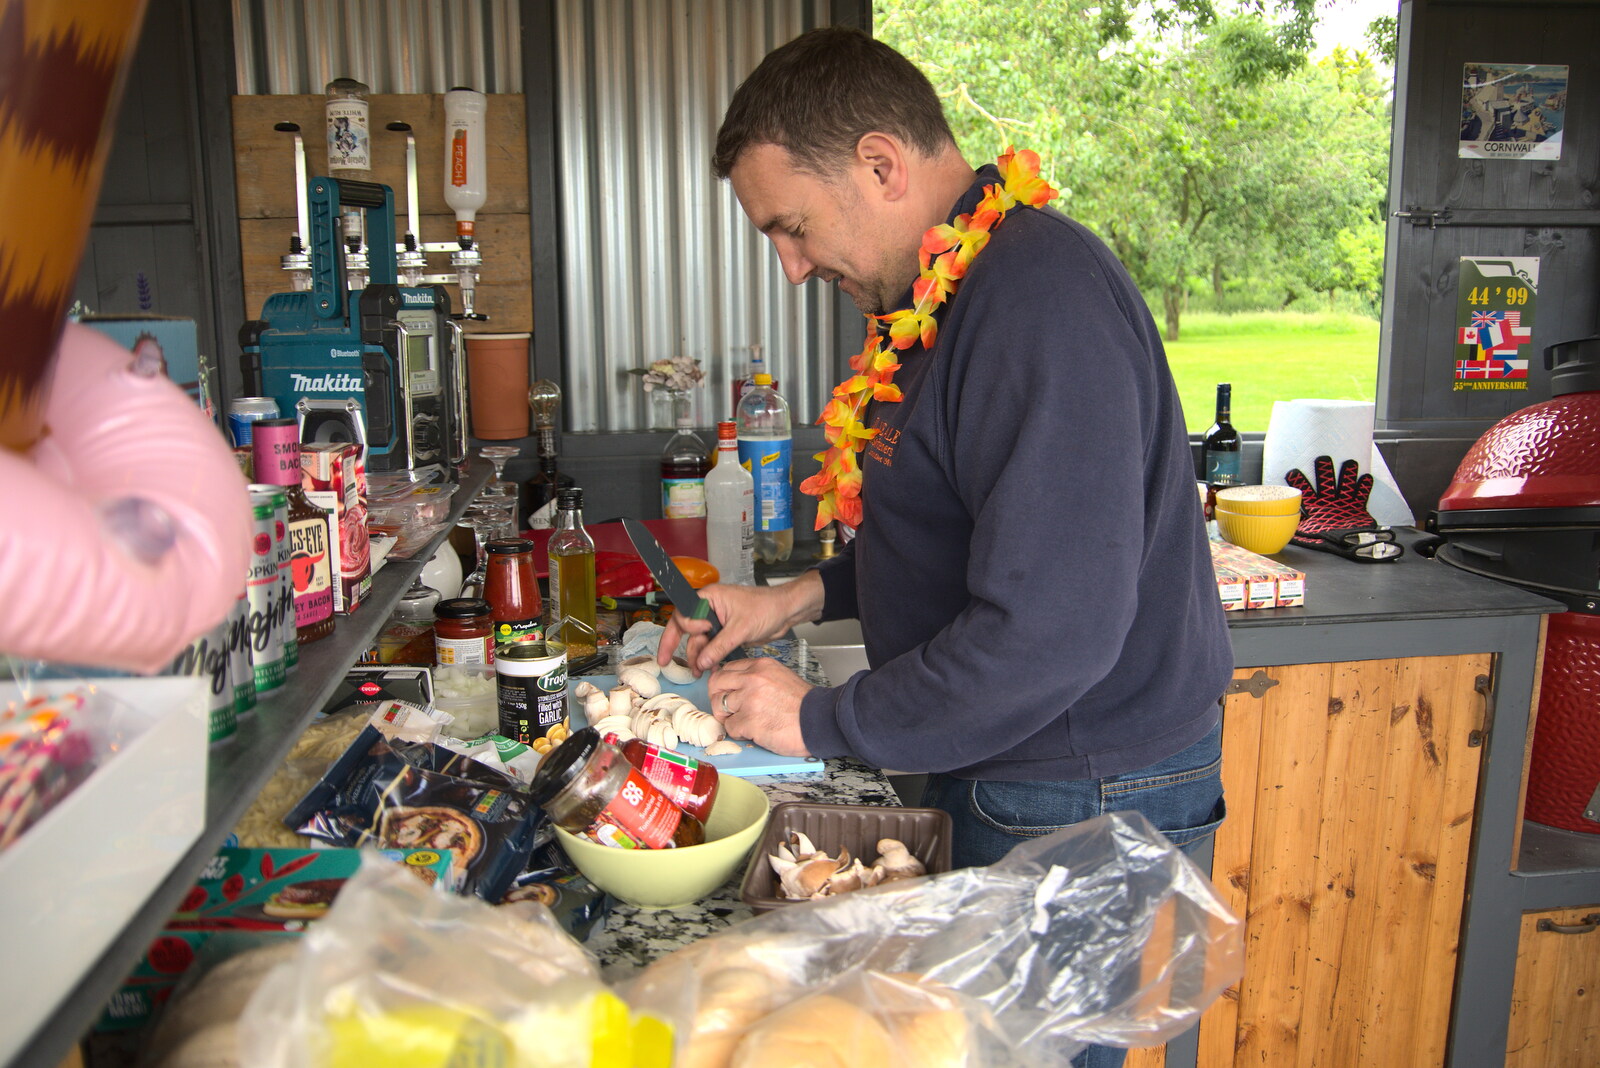 Clive is on pizza prep duty from Suze-fest, Braisworth, Suffolk - 19th June 2021